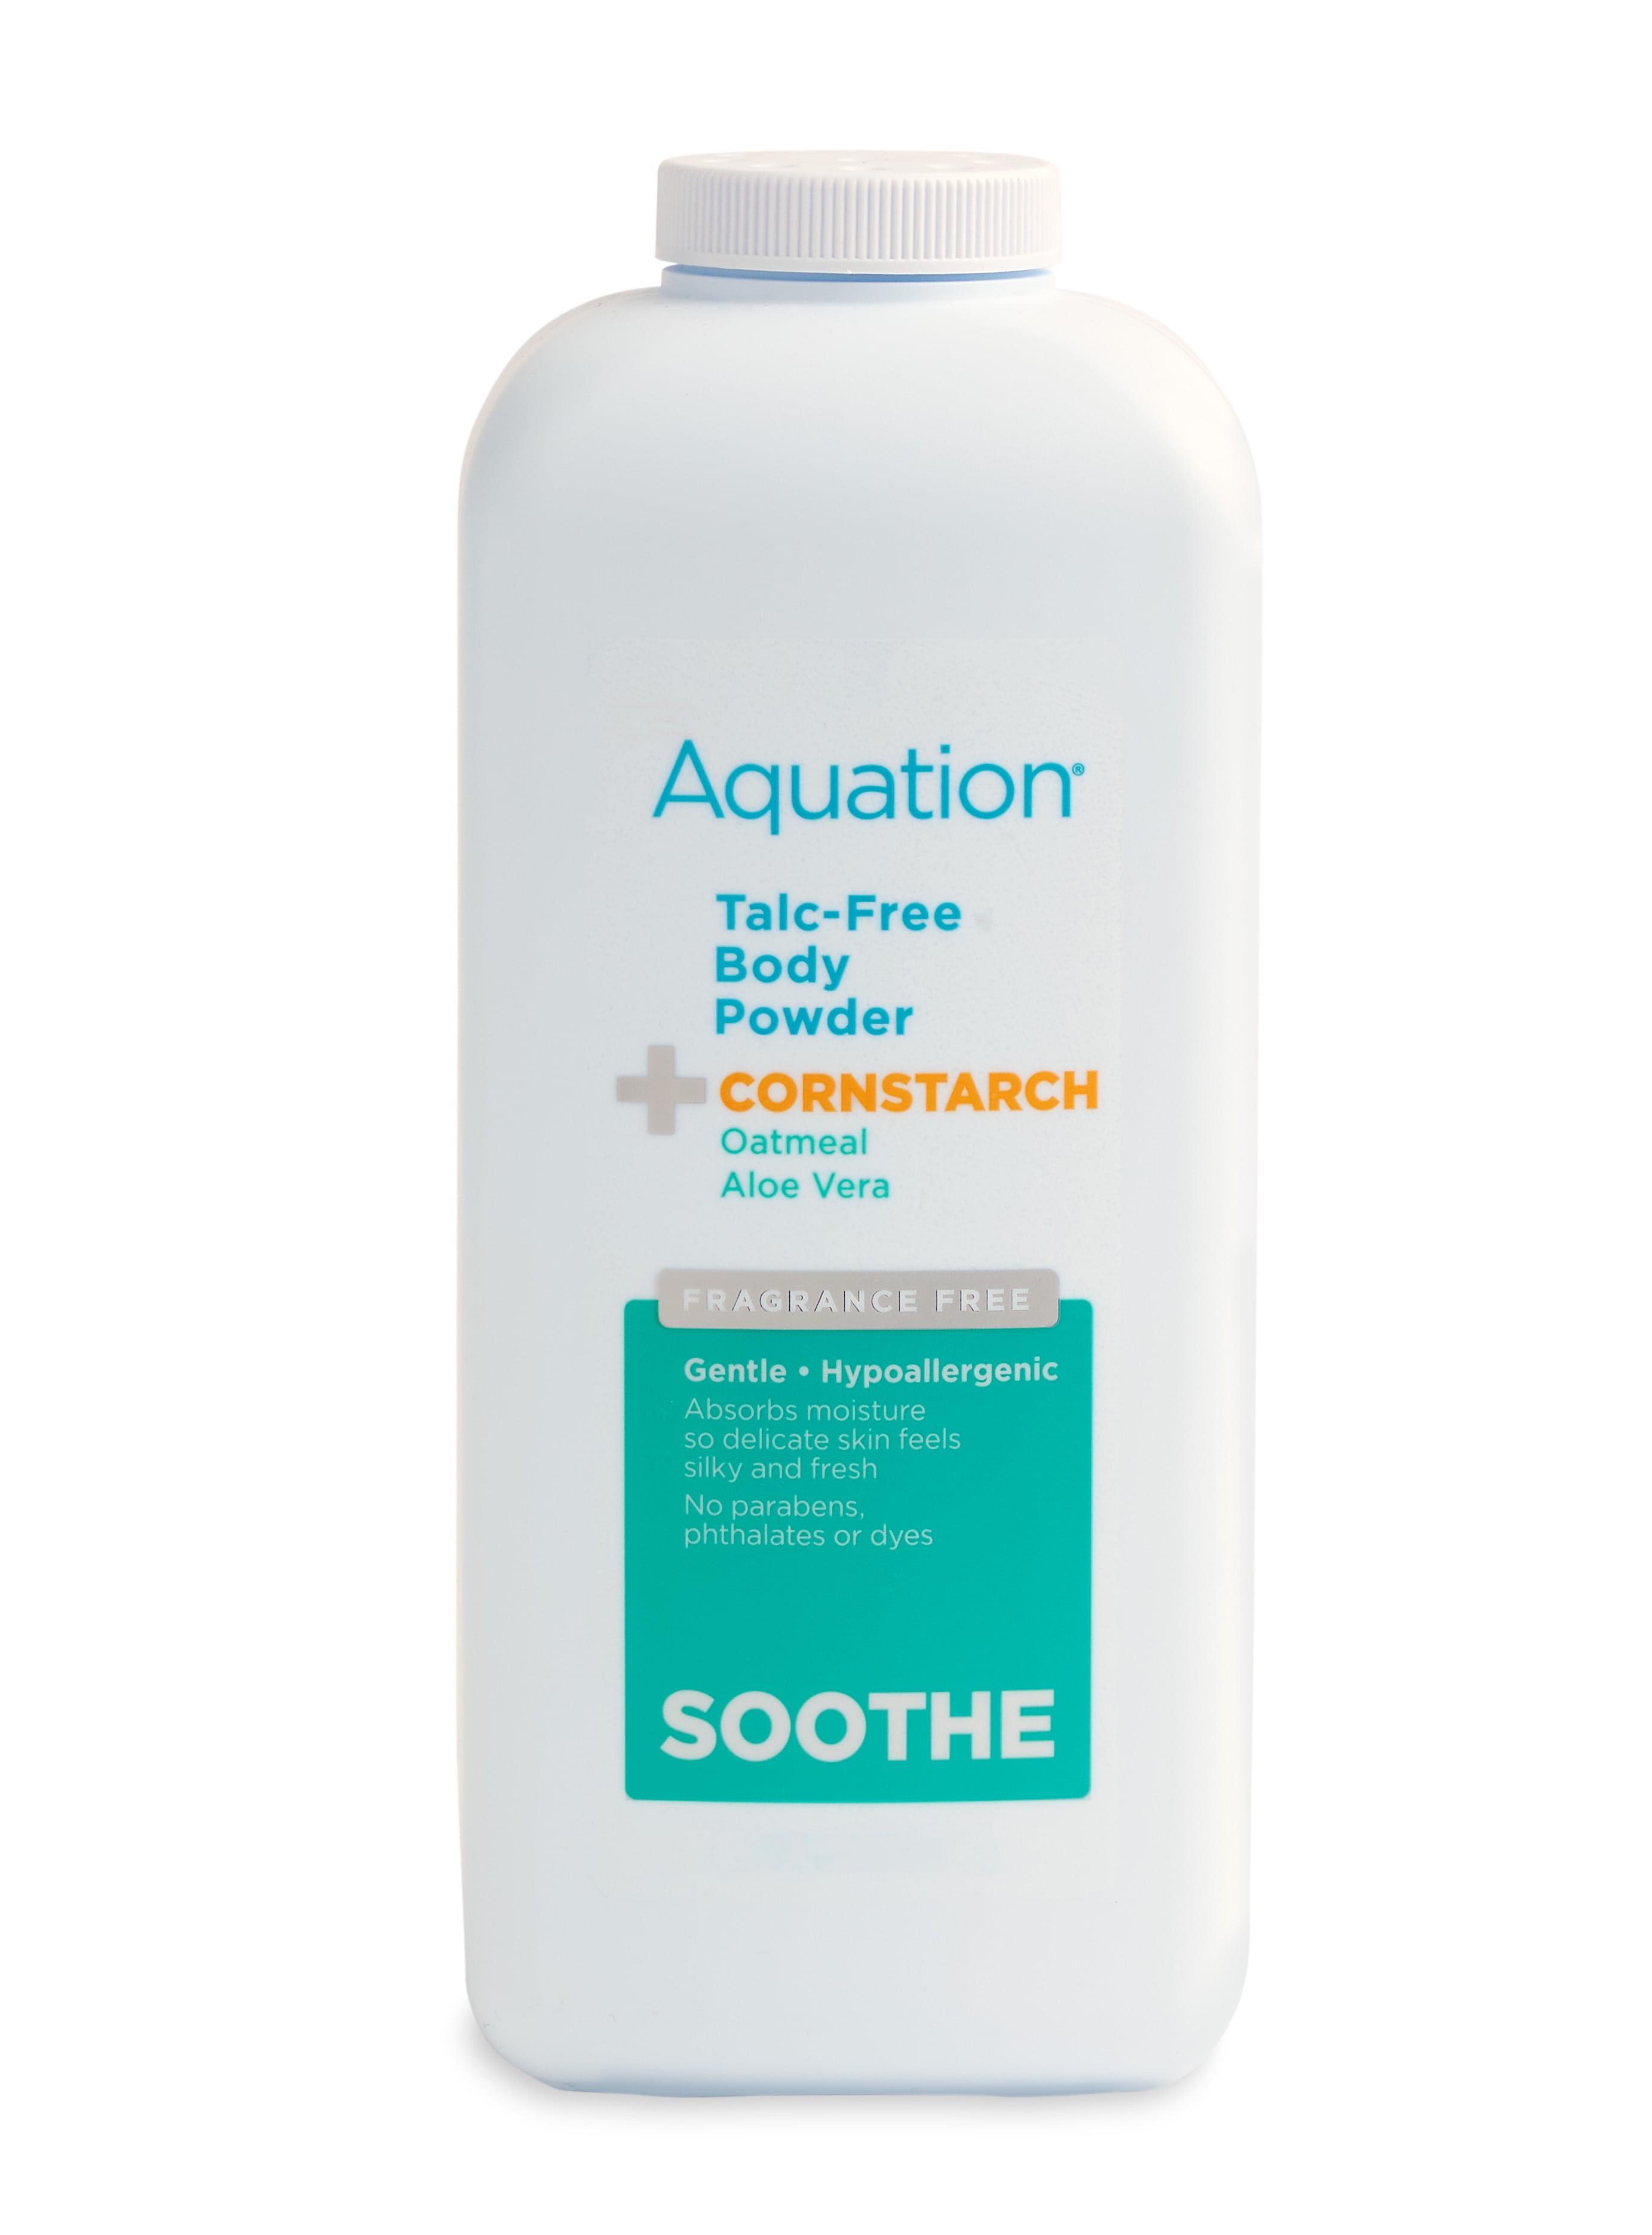 Soothe and Cool Cornstarch Body Powder